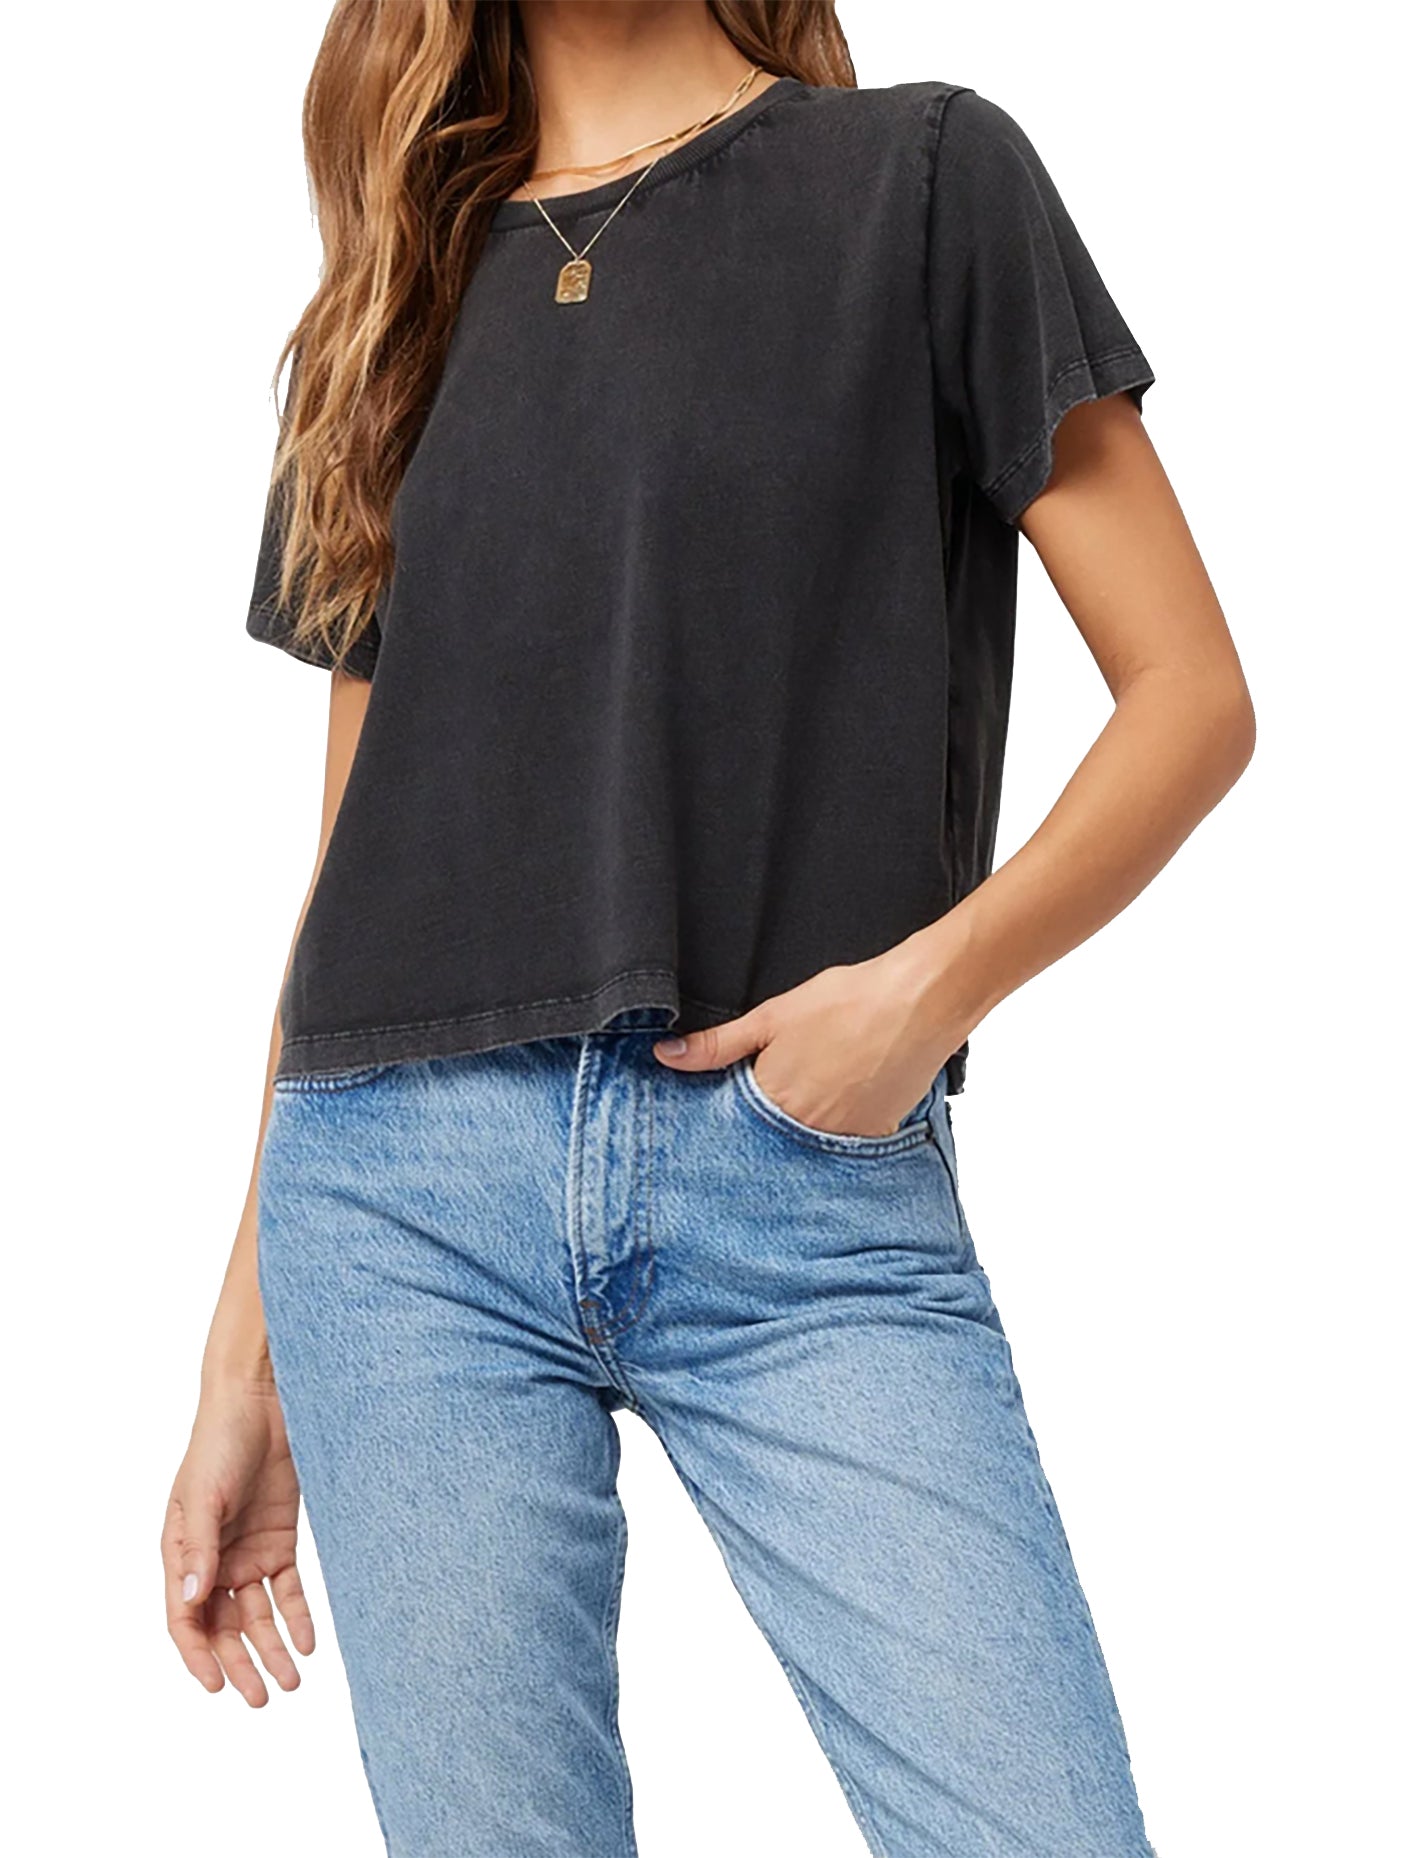 All Day Top: Black